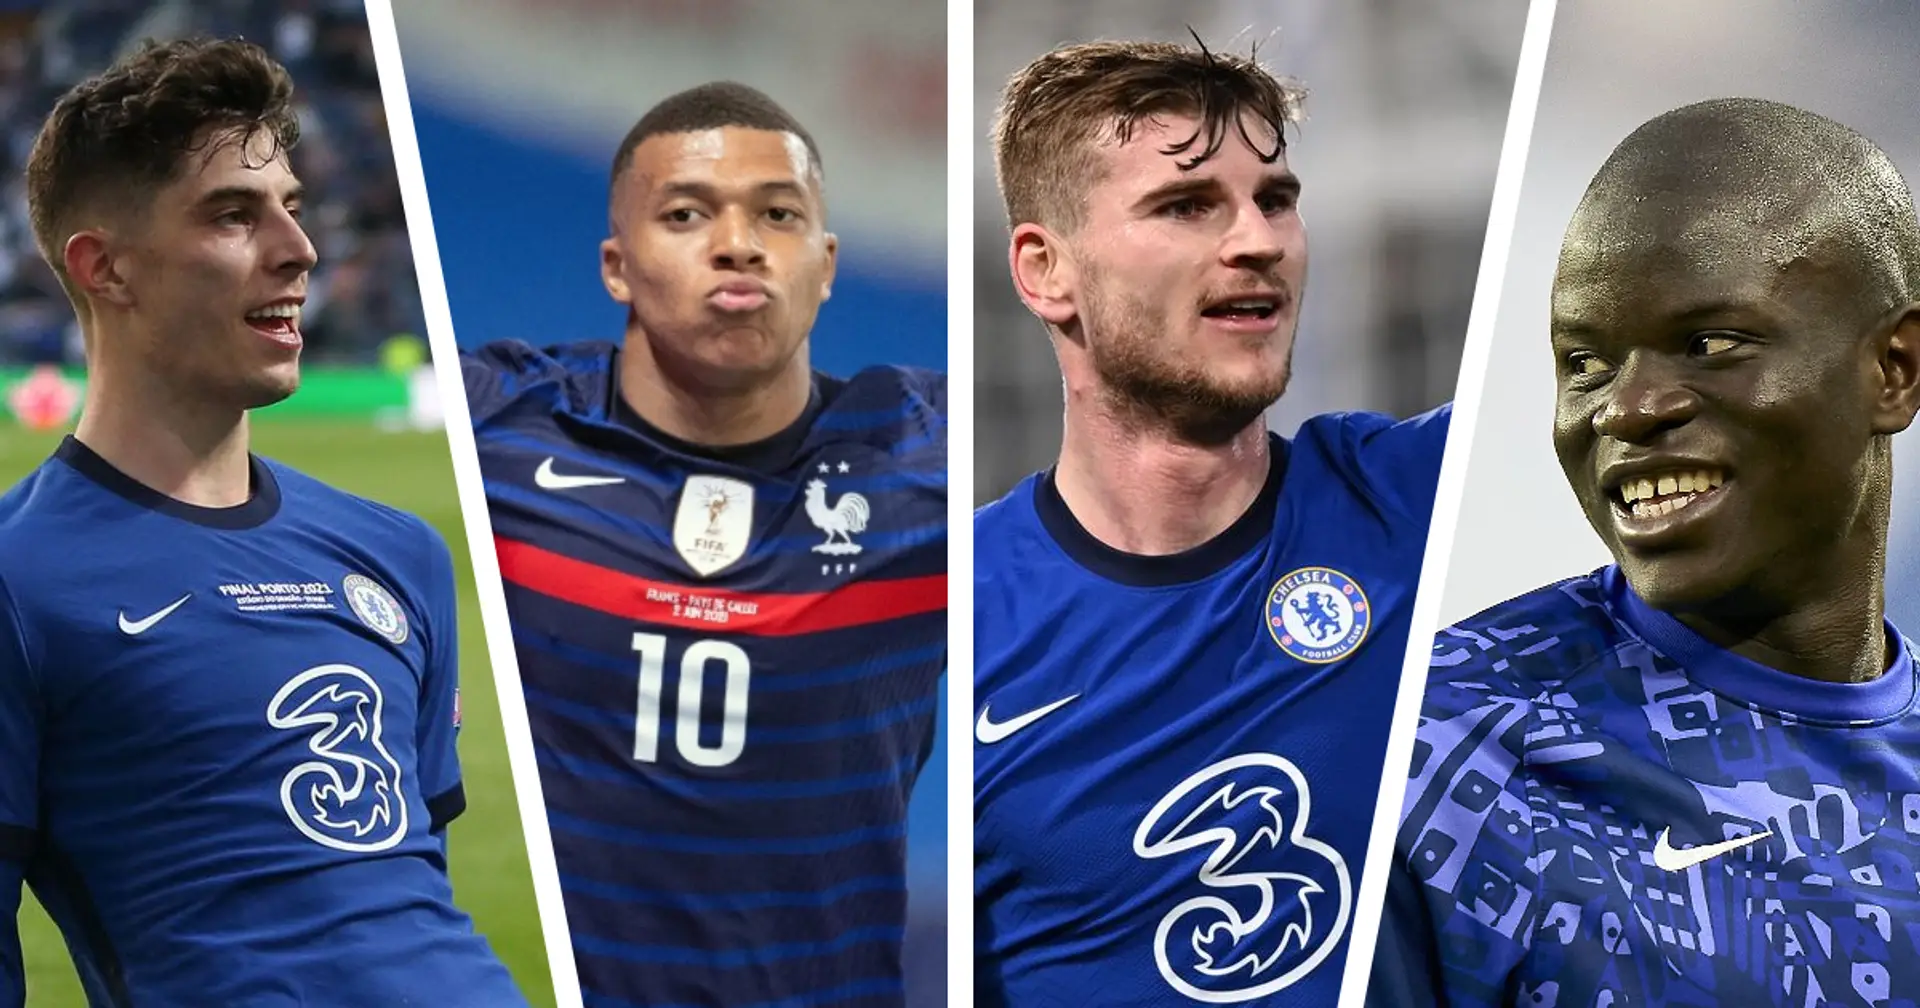 6 Chelsea players in Euro 2020 group of death, top 15 ranked by market value